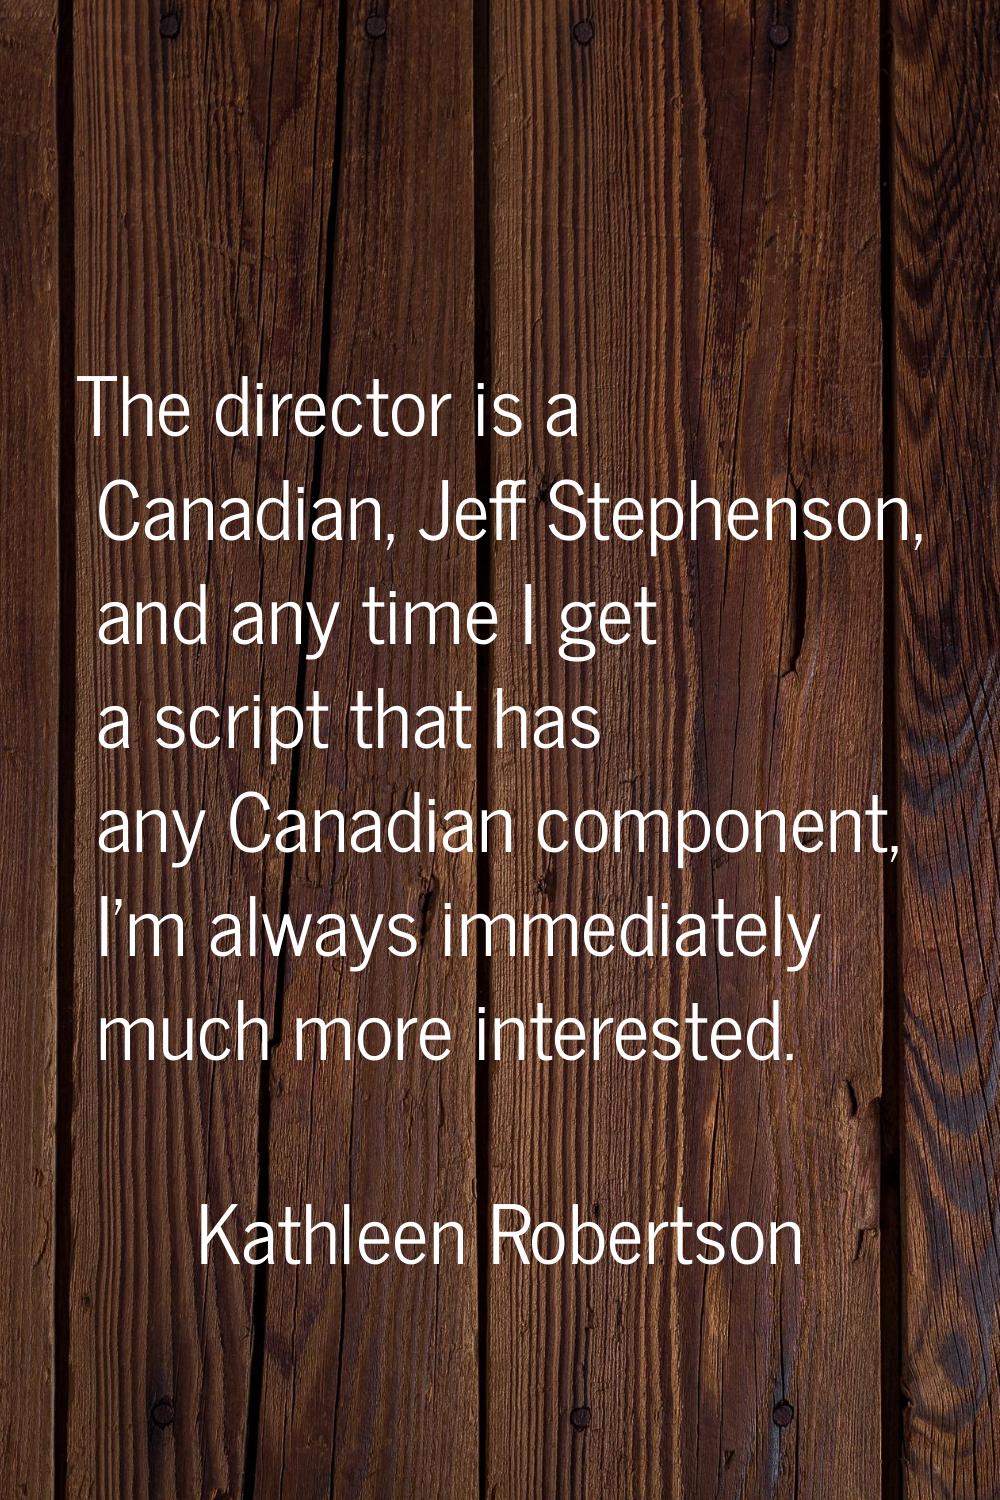 The director is a Canadian, Jeff Stephenson, and any time I get a script that has any Canadian comp